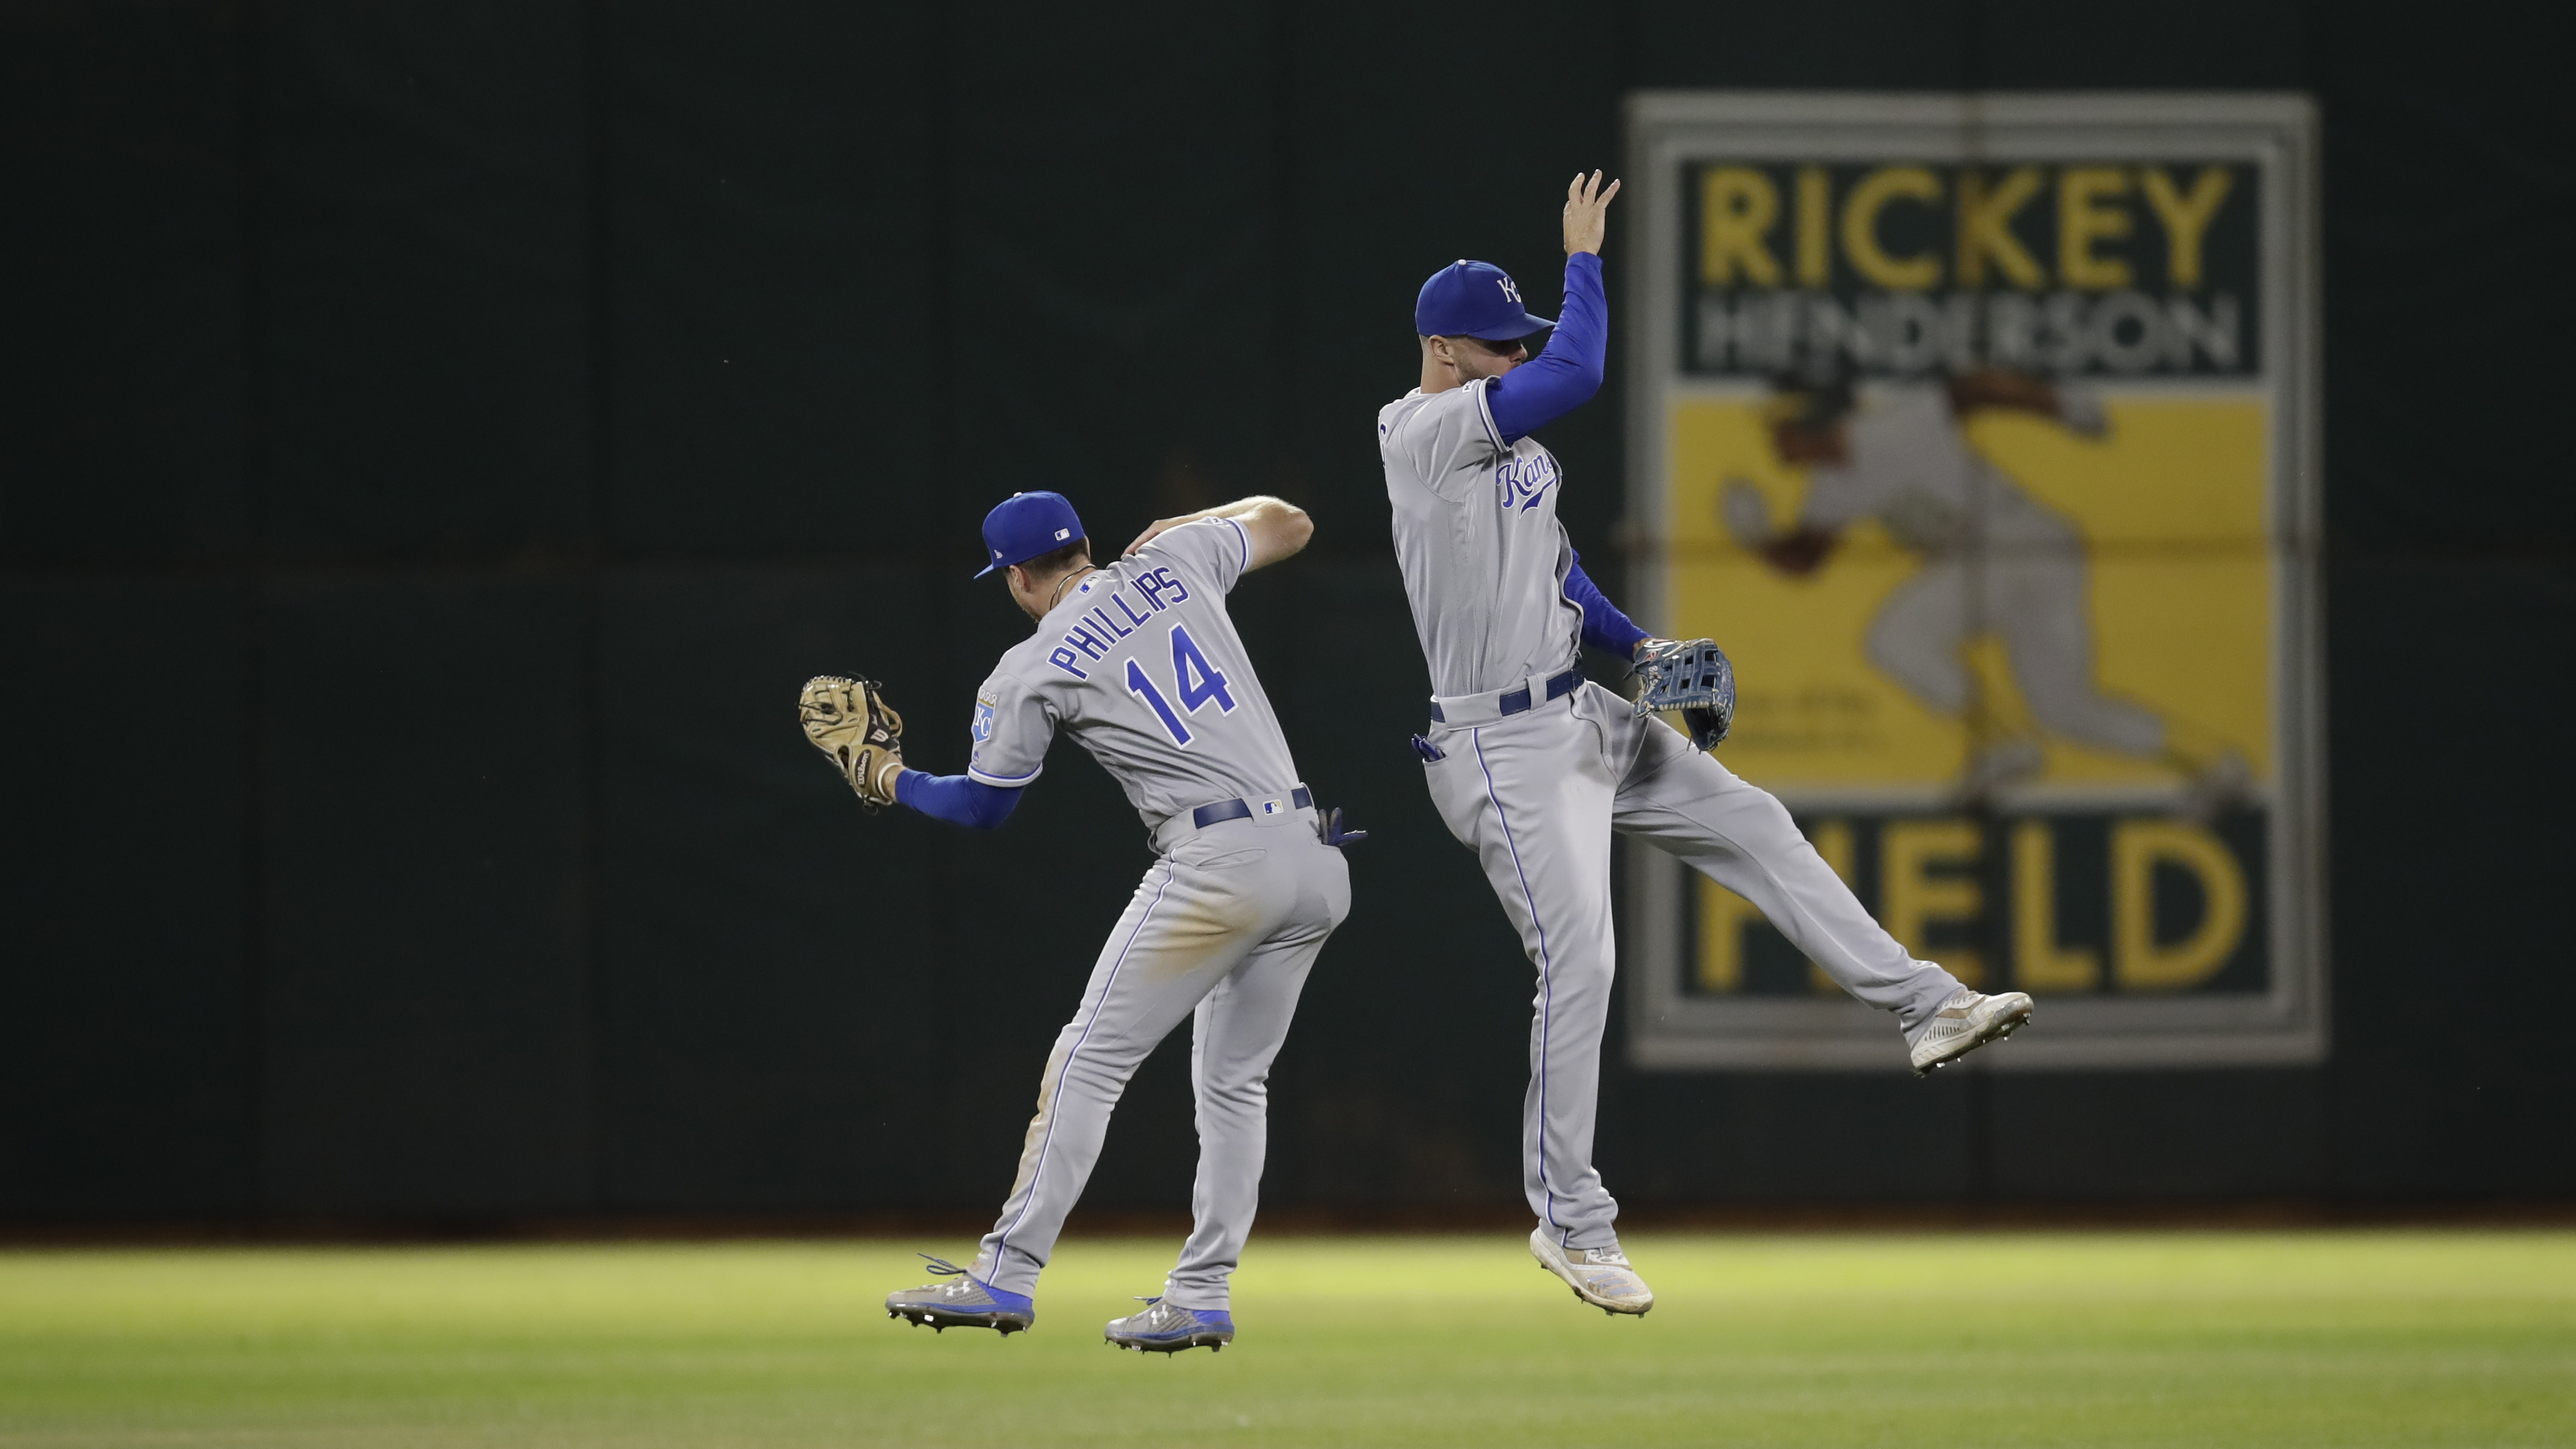 A's waste late lead to Royals, lead over Tampa Bay down to 1